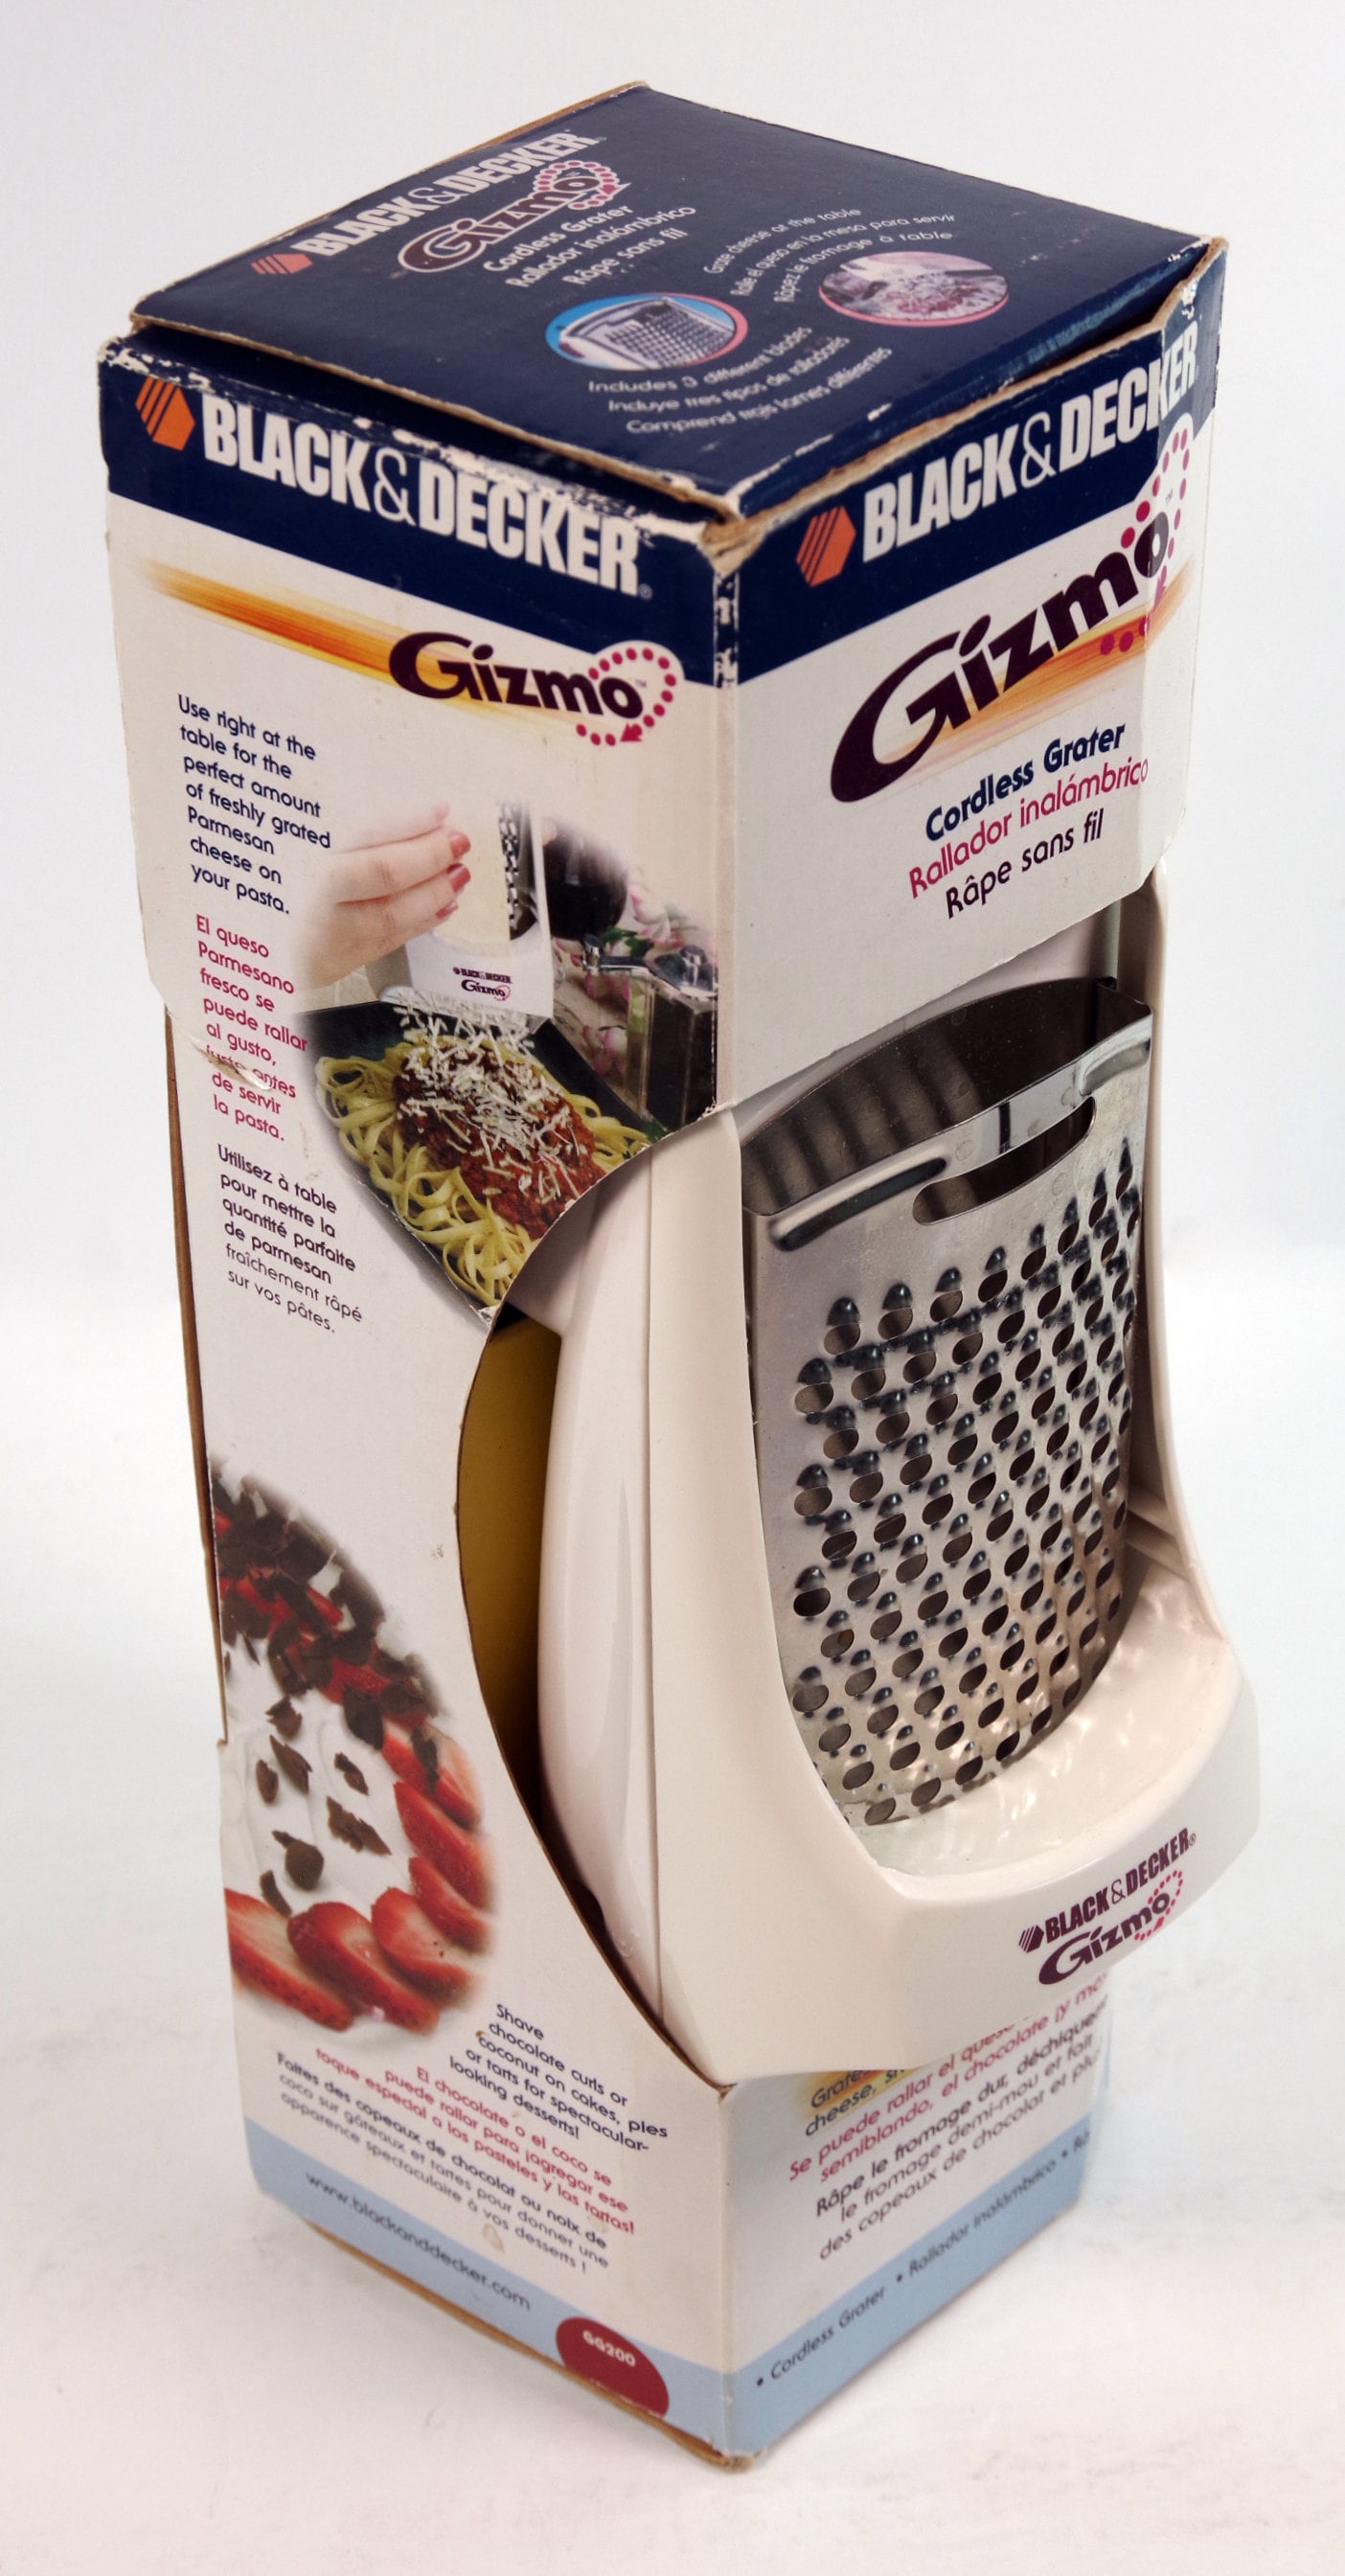 Electric Potato Grater Machine: instructions for Pasteles 